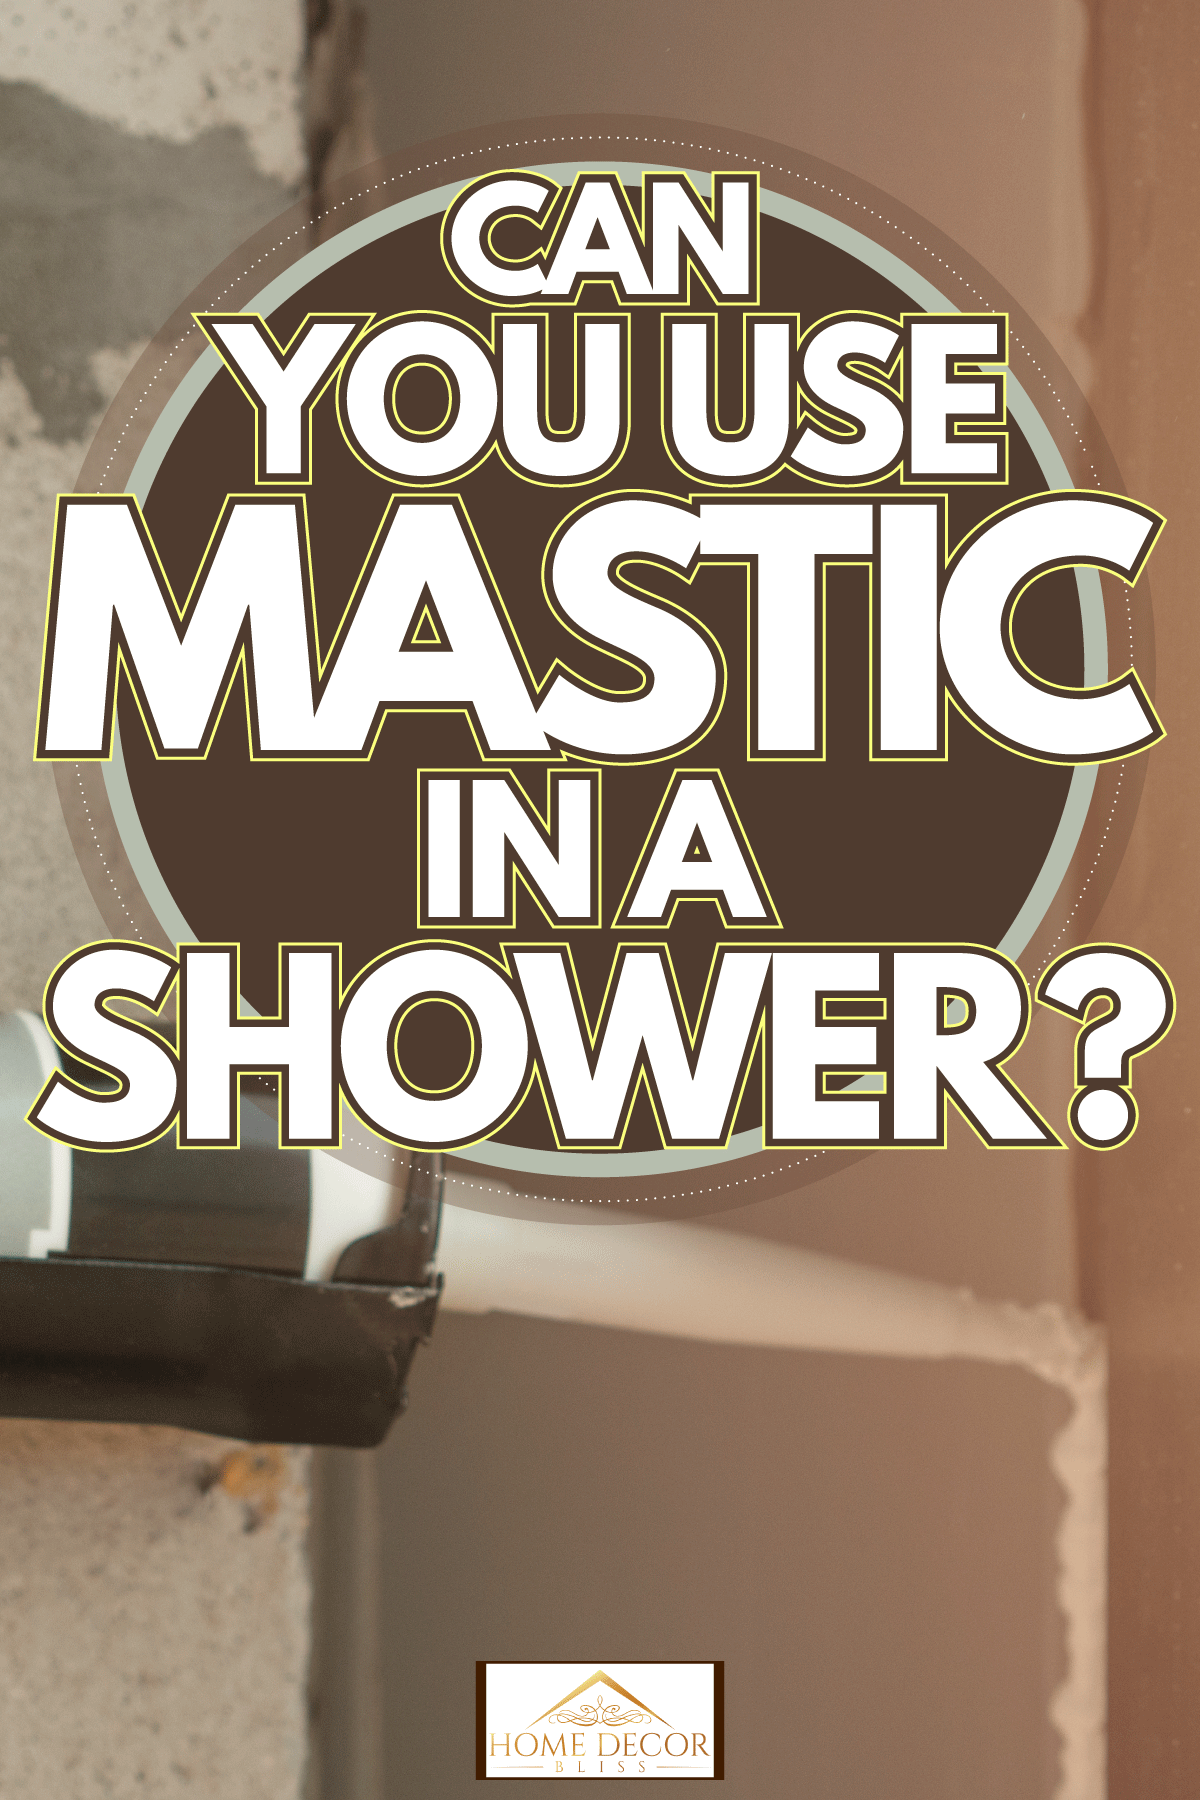 Mastic advantages and disadvantages when used, Can you use mastic in a shower?